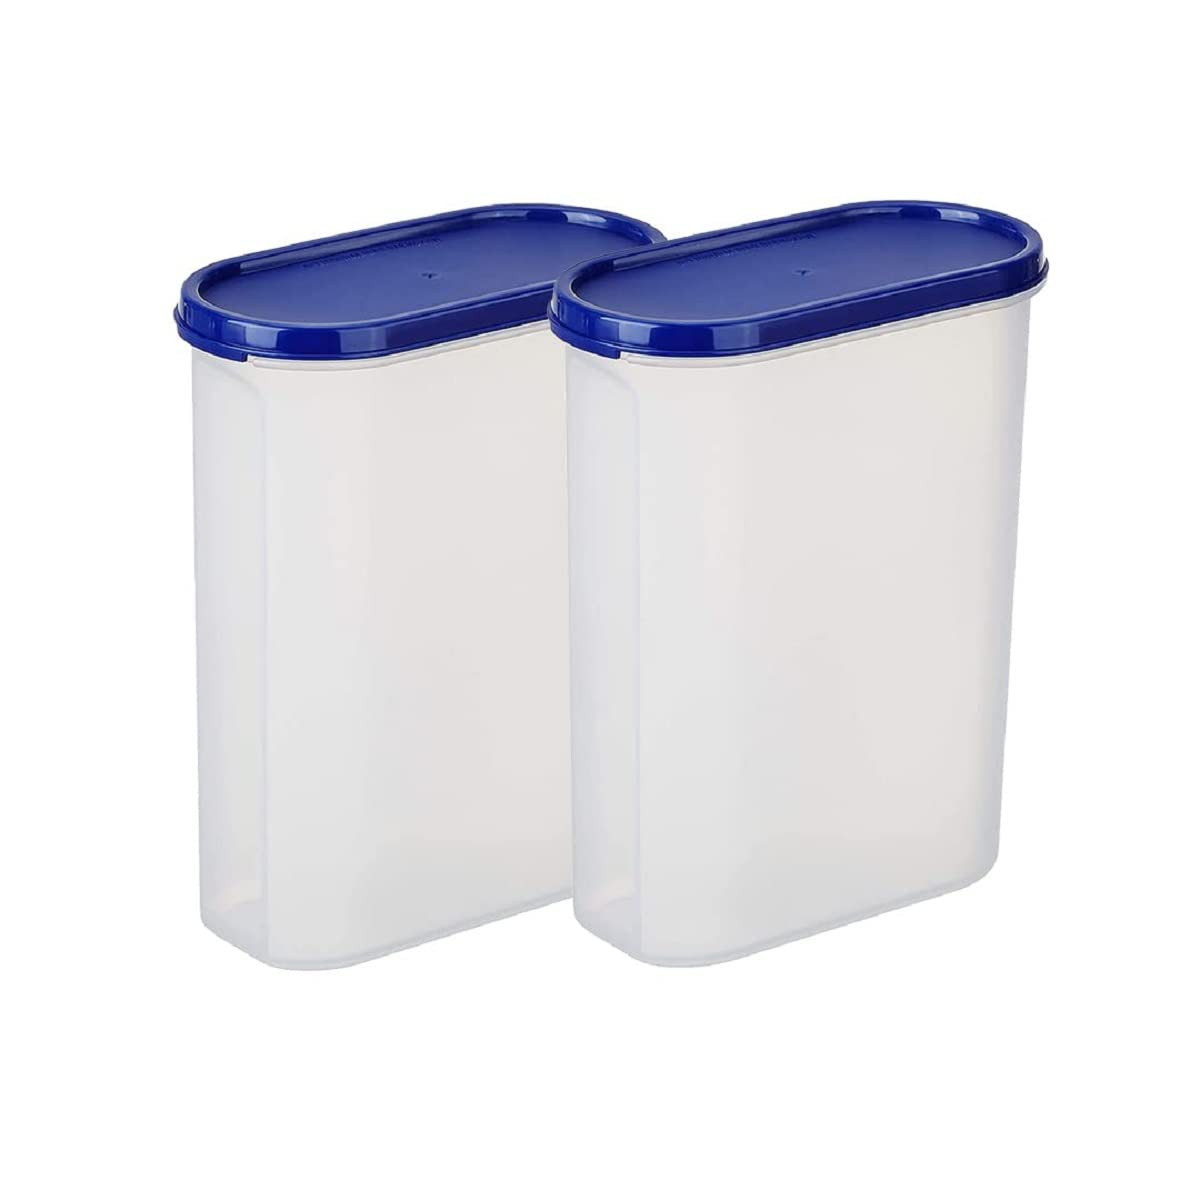 Kuber Industries Plastic Storage Containers With Lid I Set of 2, 2500 ml | Airtight, Stackable, Spill-proof, Travel-friendly | Transparent with Blue Lid | For Dry & Wet Foods, Cereals, Dryfruits